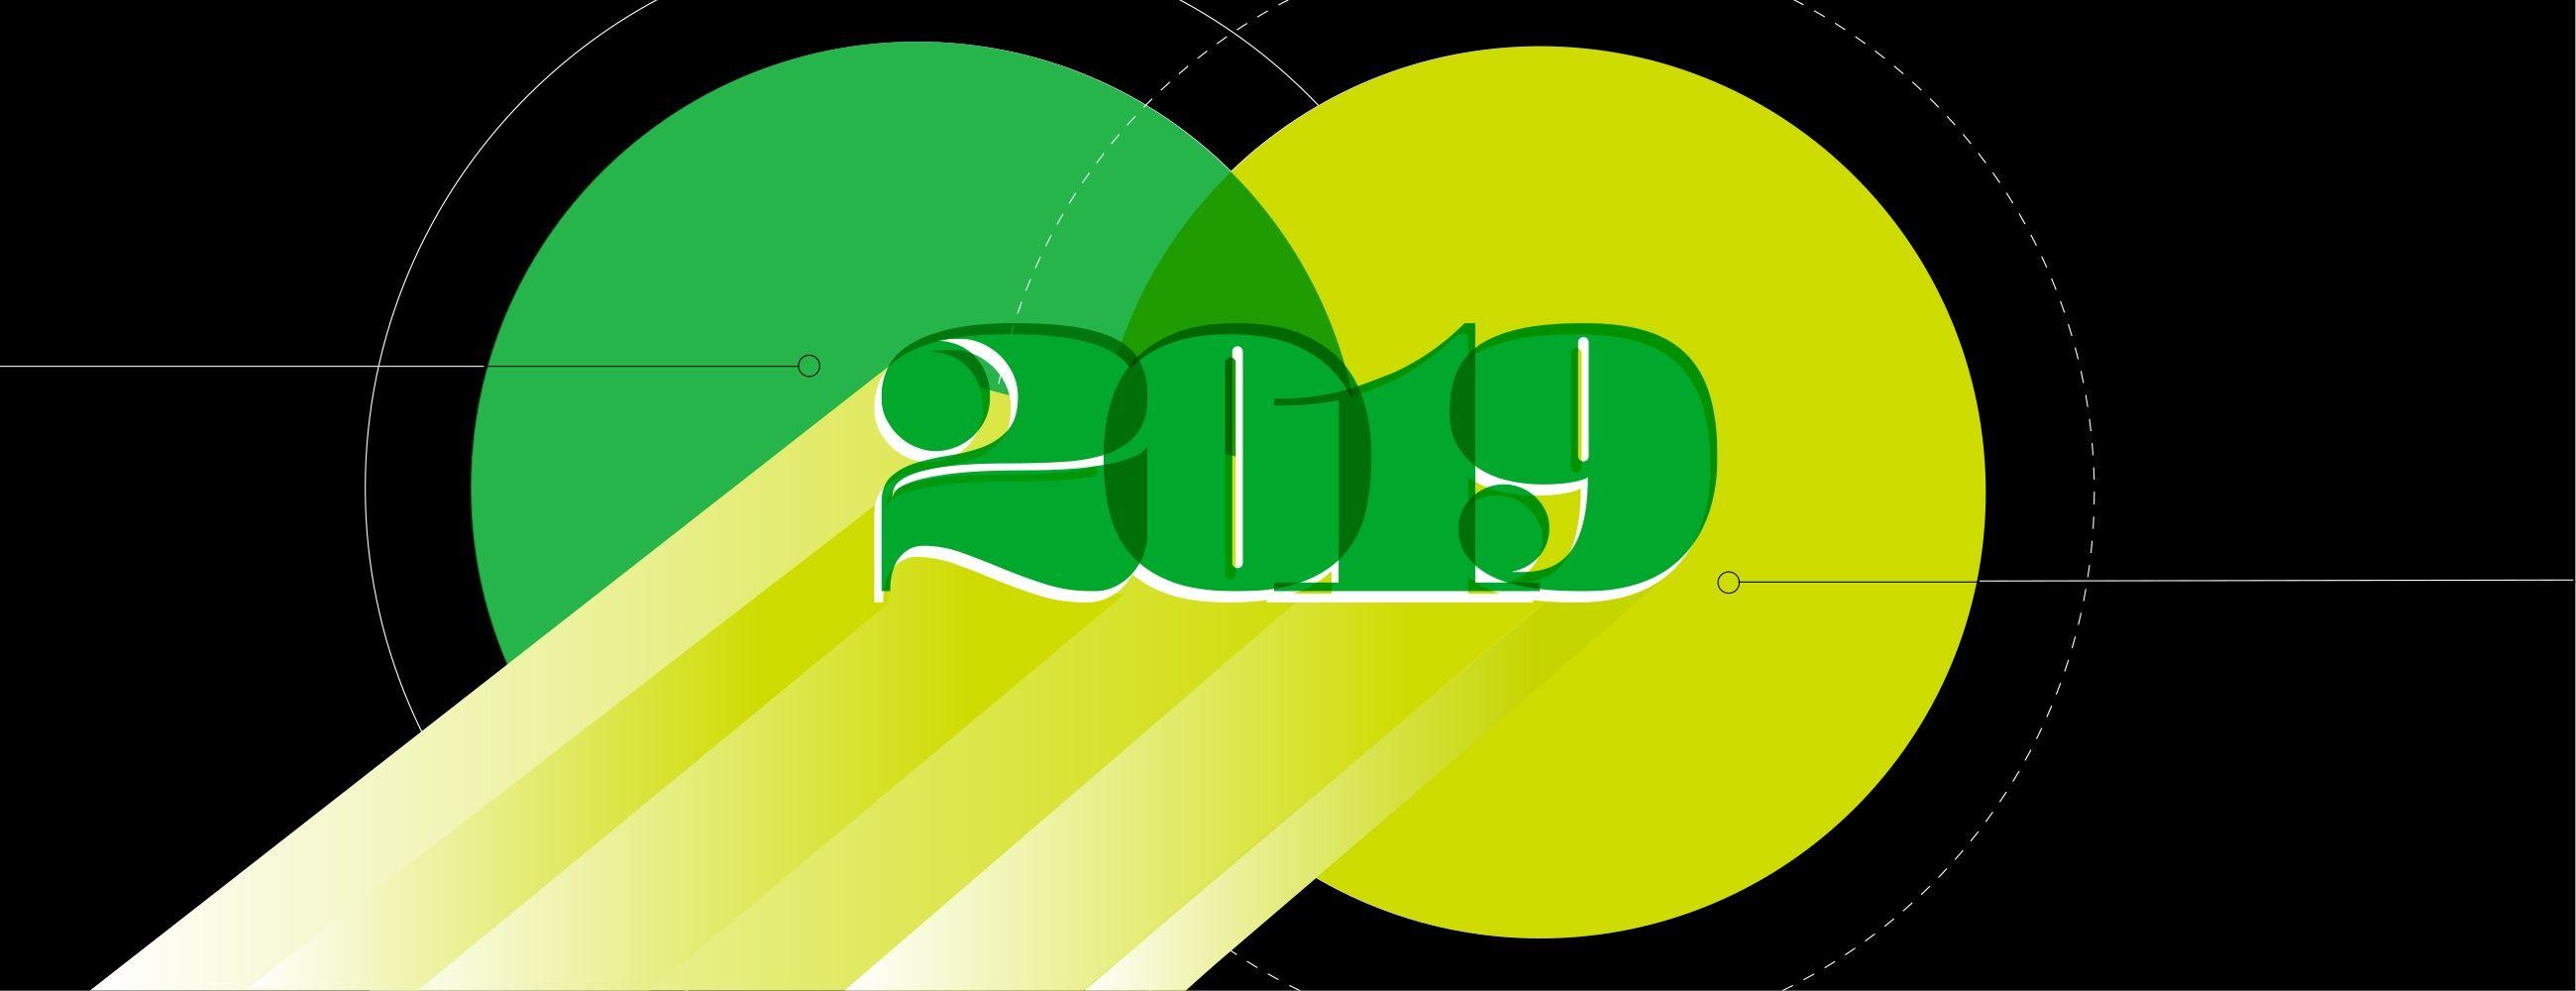 Yellow and Green Circle Logo - Looking Ahead: Evernote's Priorities for 2019 | Evernote Blog